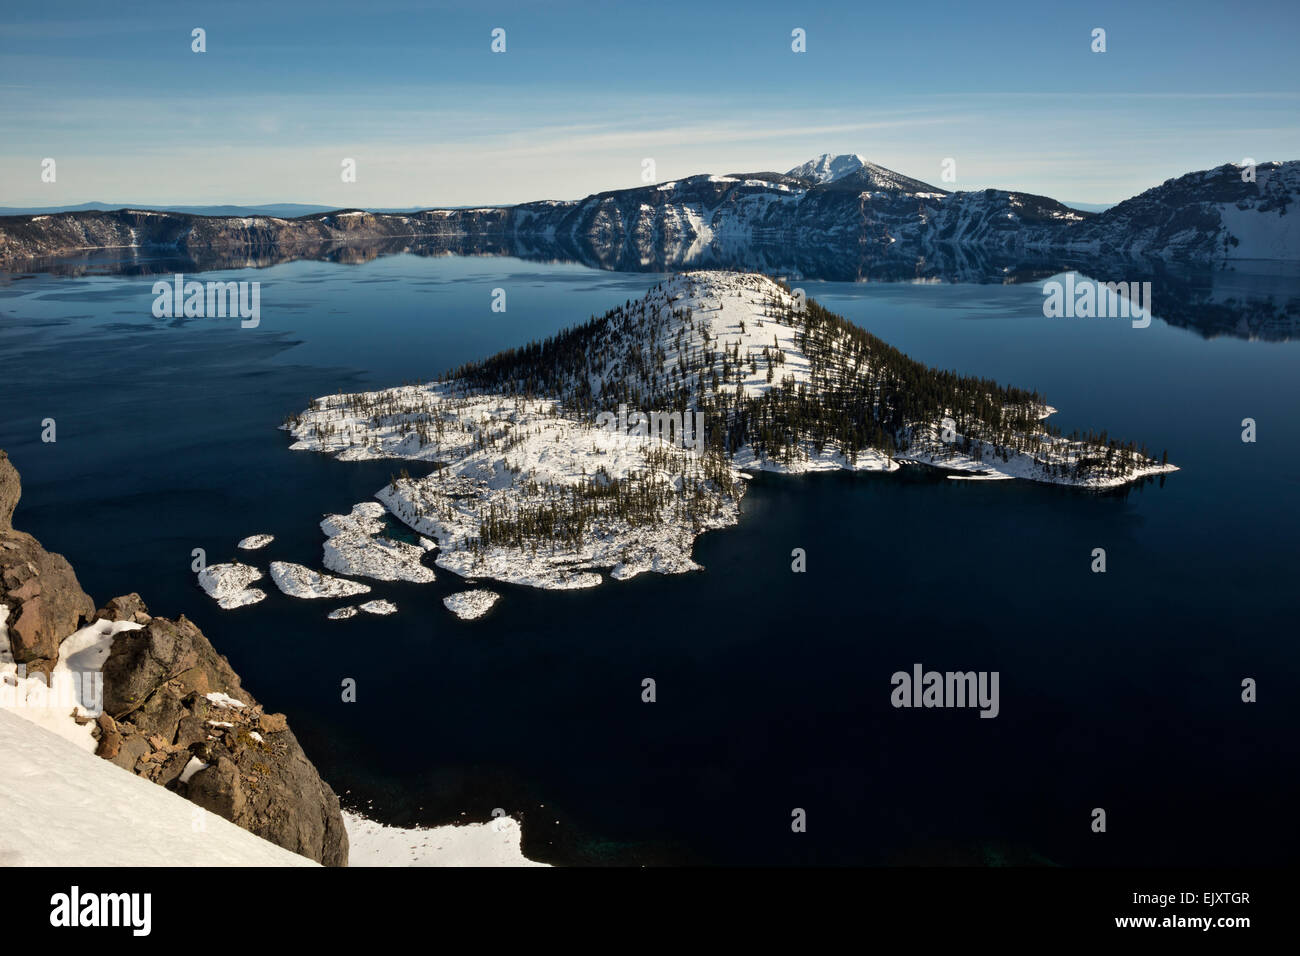 OR02102-00... OREGON - Schnee auf Wizard Island vom Rand des Crater Lake in Crater Lake National Park. Stockfoto